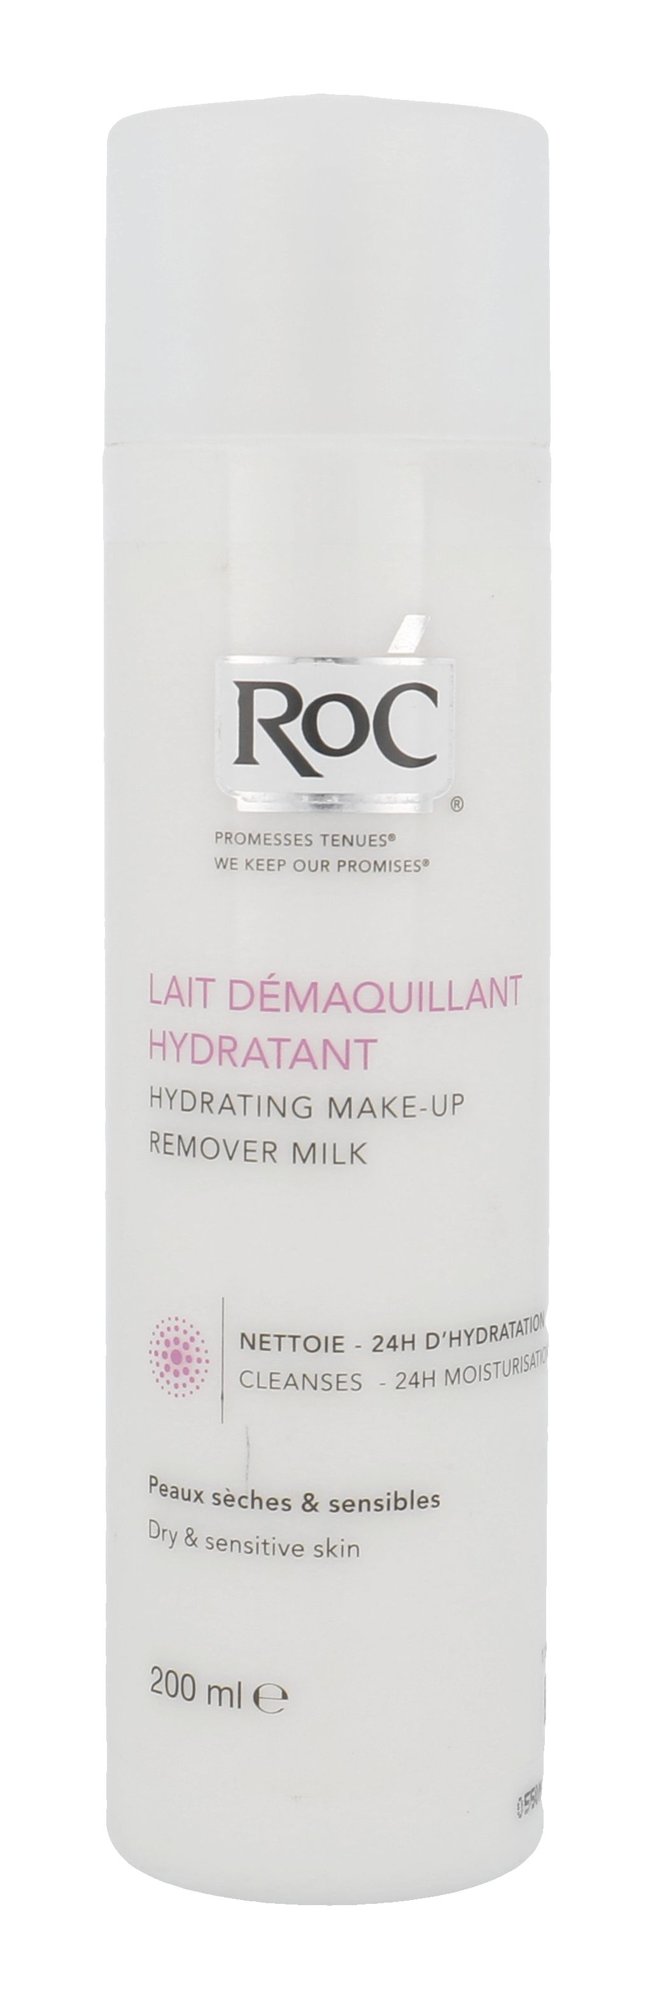 RoC Hydrating Make-Up Remover Milk